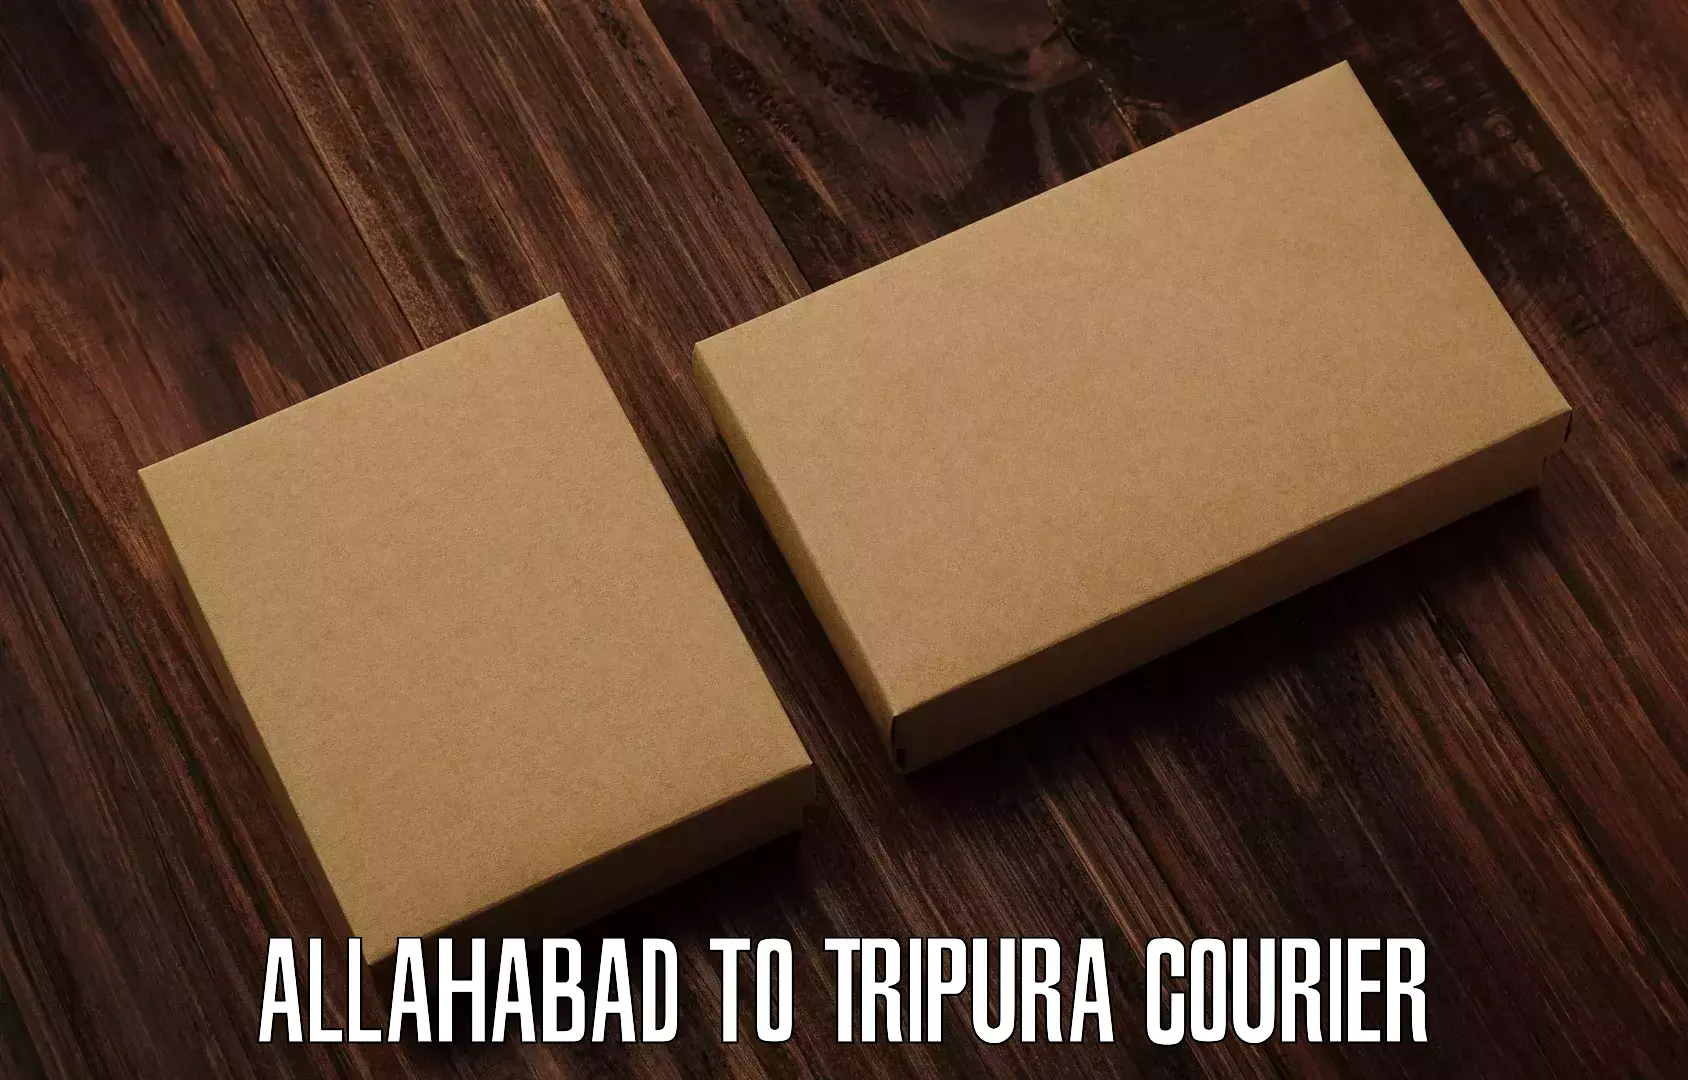 Next-day delivery options Allahabad to IIIT Agartala